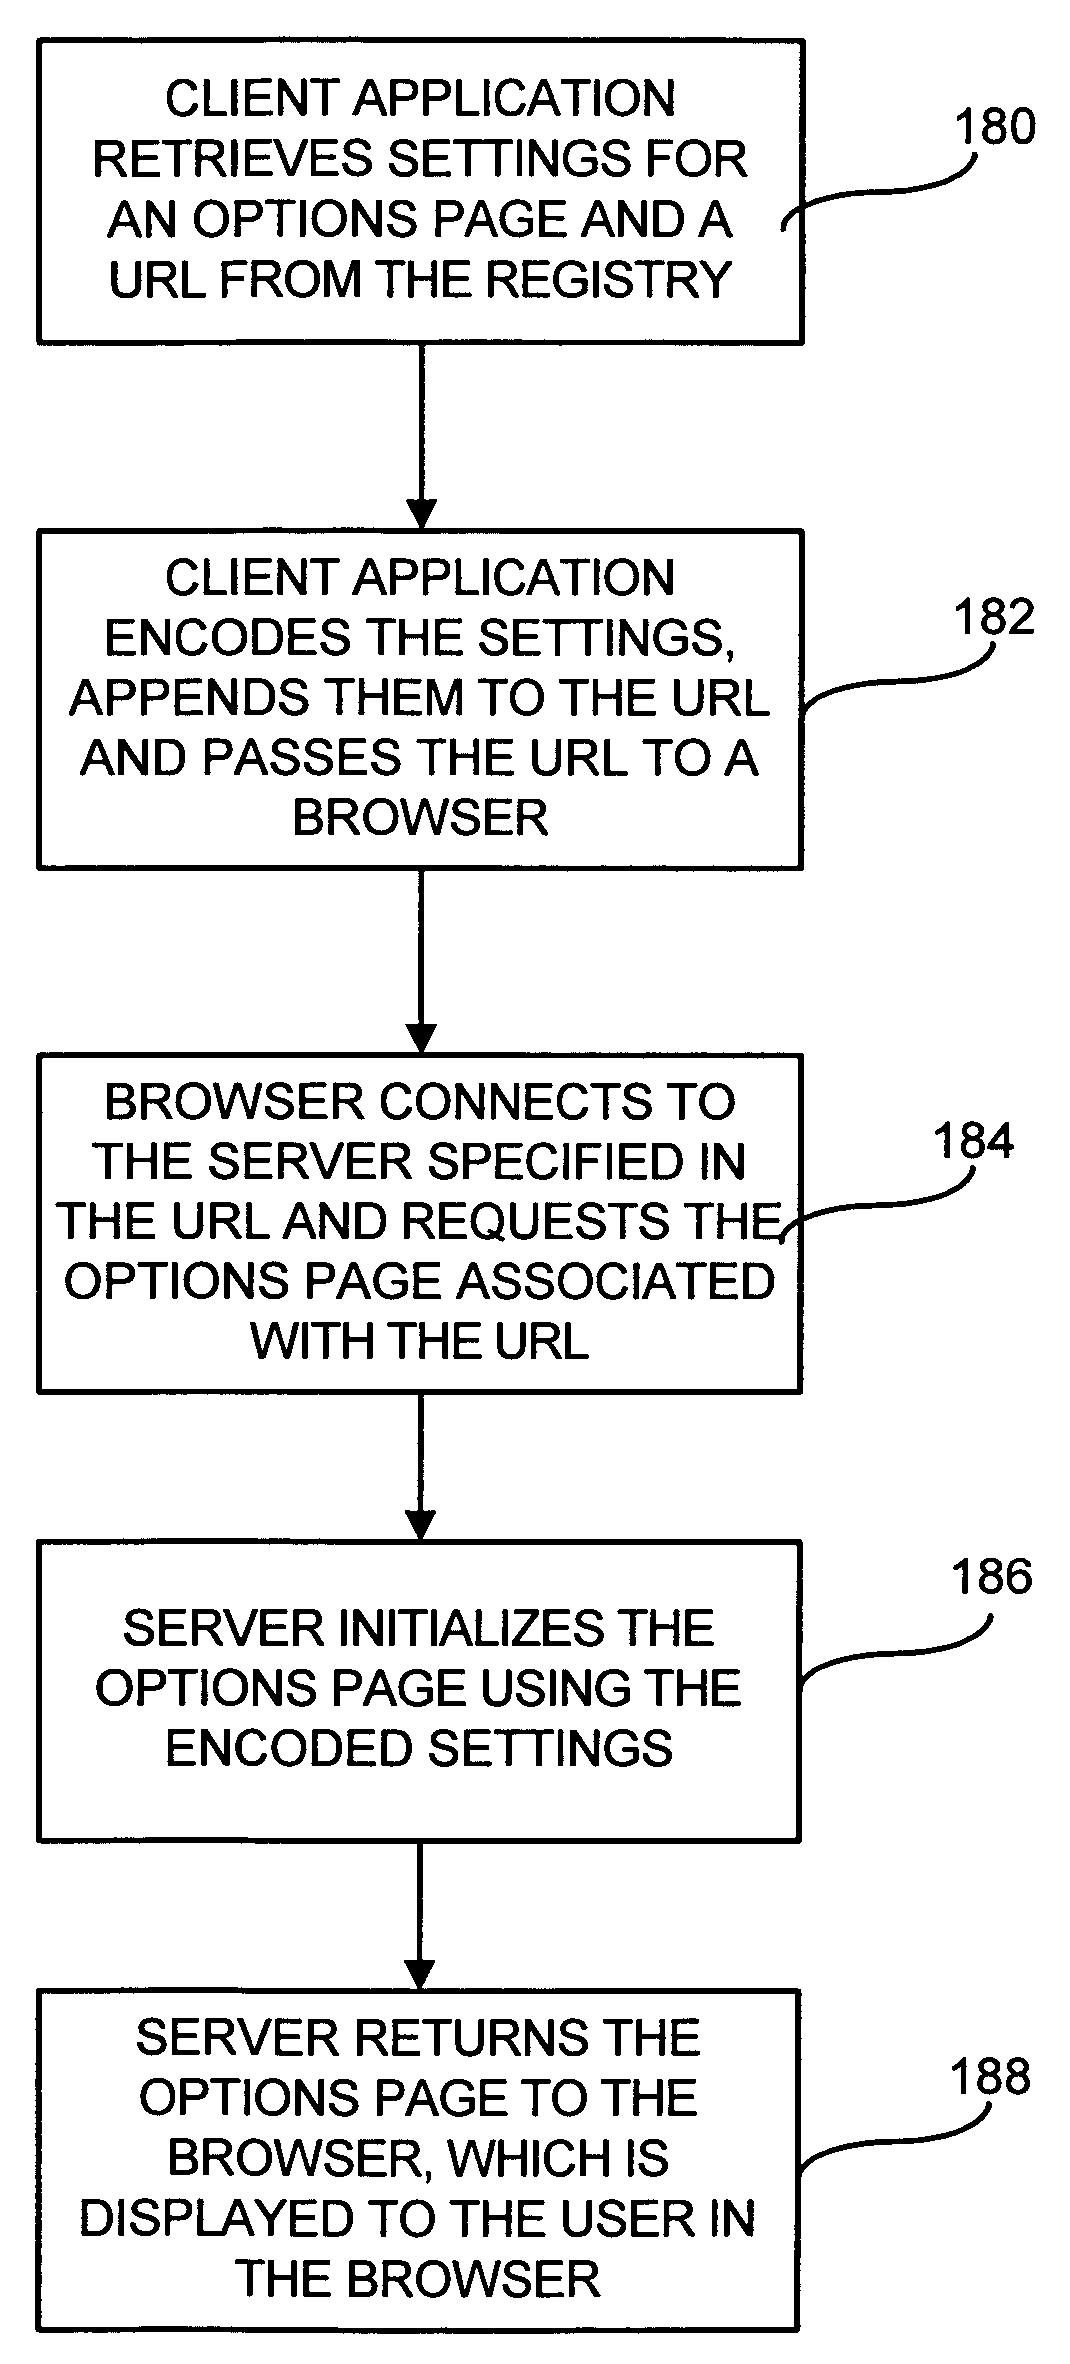 Customizing a client application using an options page stored on a server computer